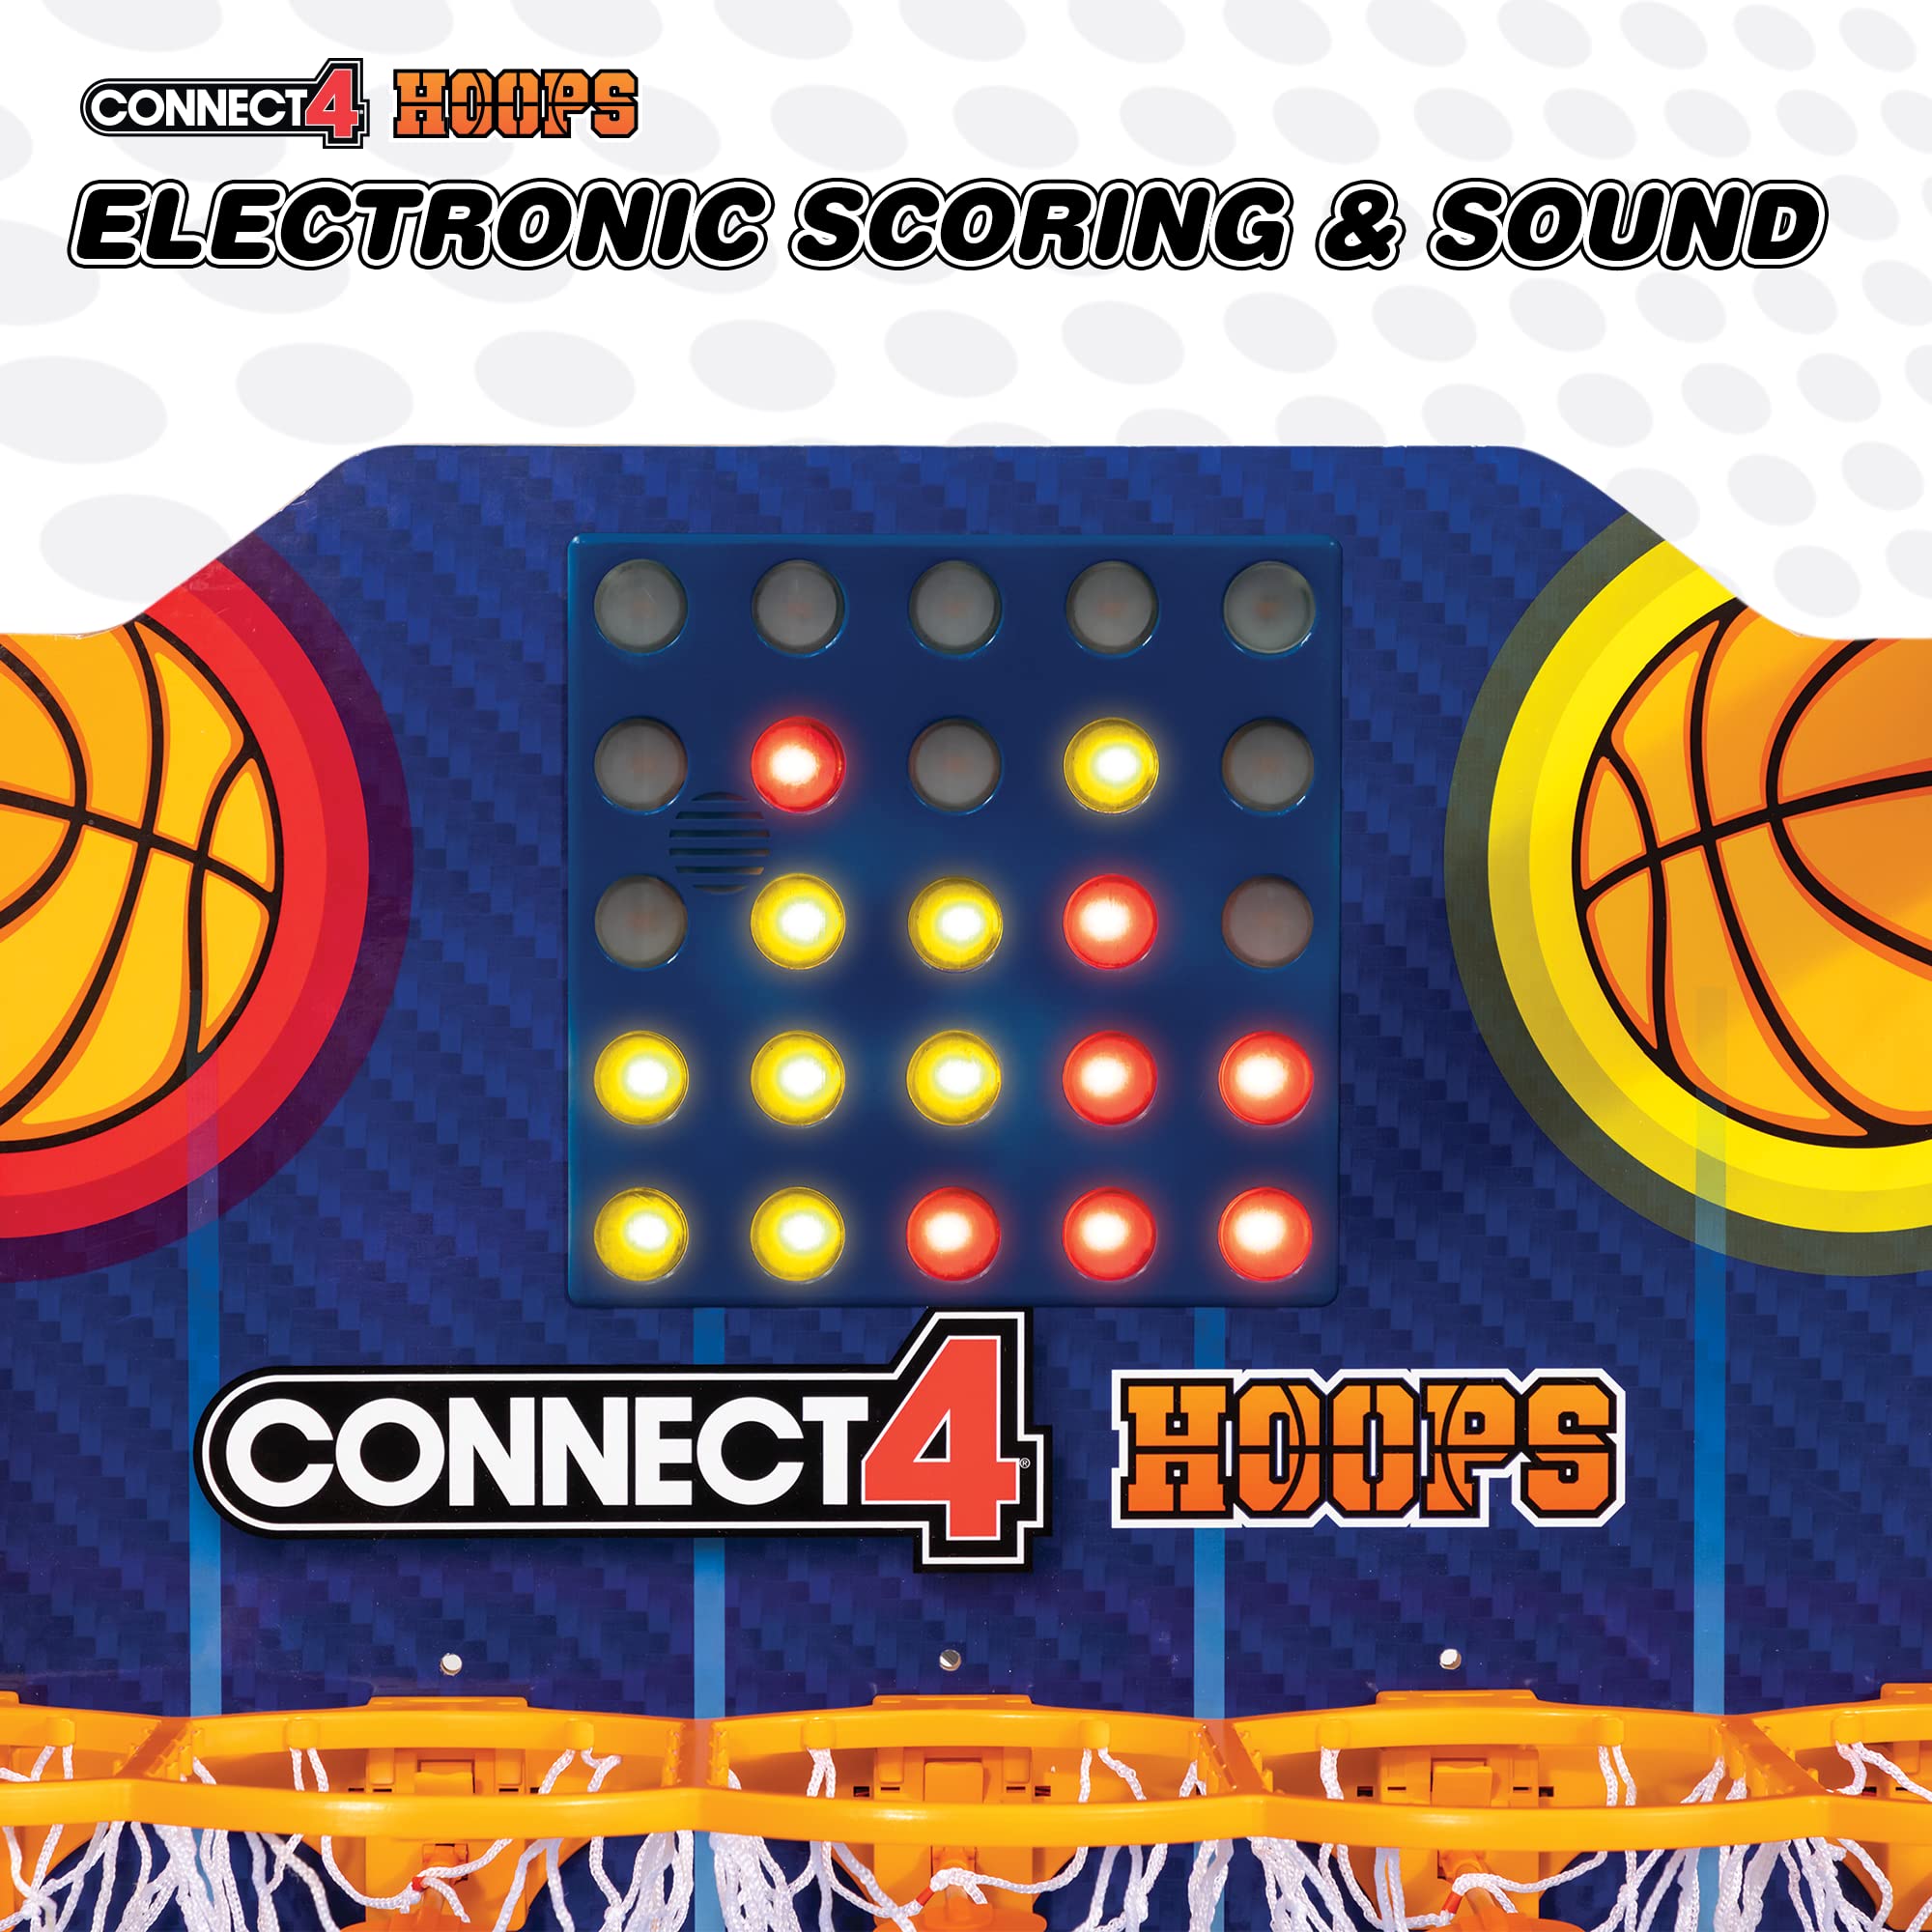 EastPoint Sports Connect 4 Hoops Indoor Basketball Arcade Game for Home, Rec Room or Man Cave - Fun for Adults, Kids & Family